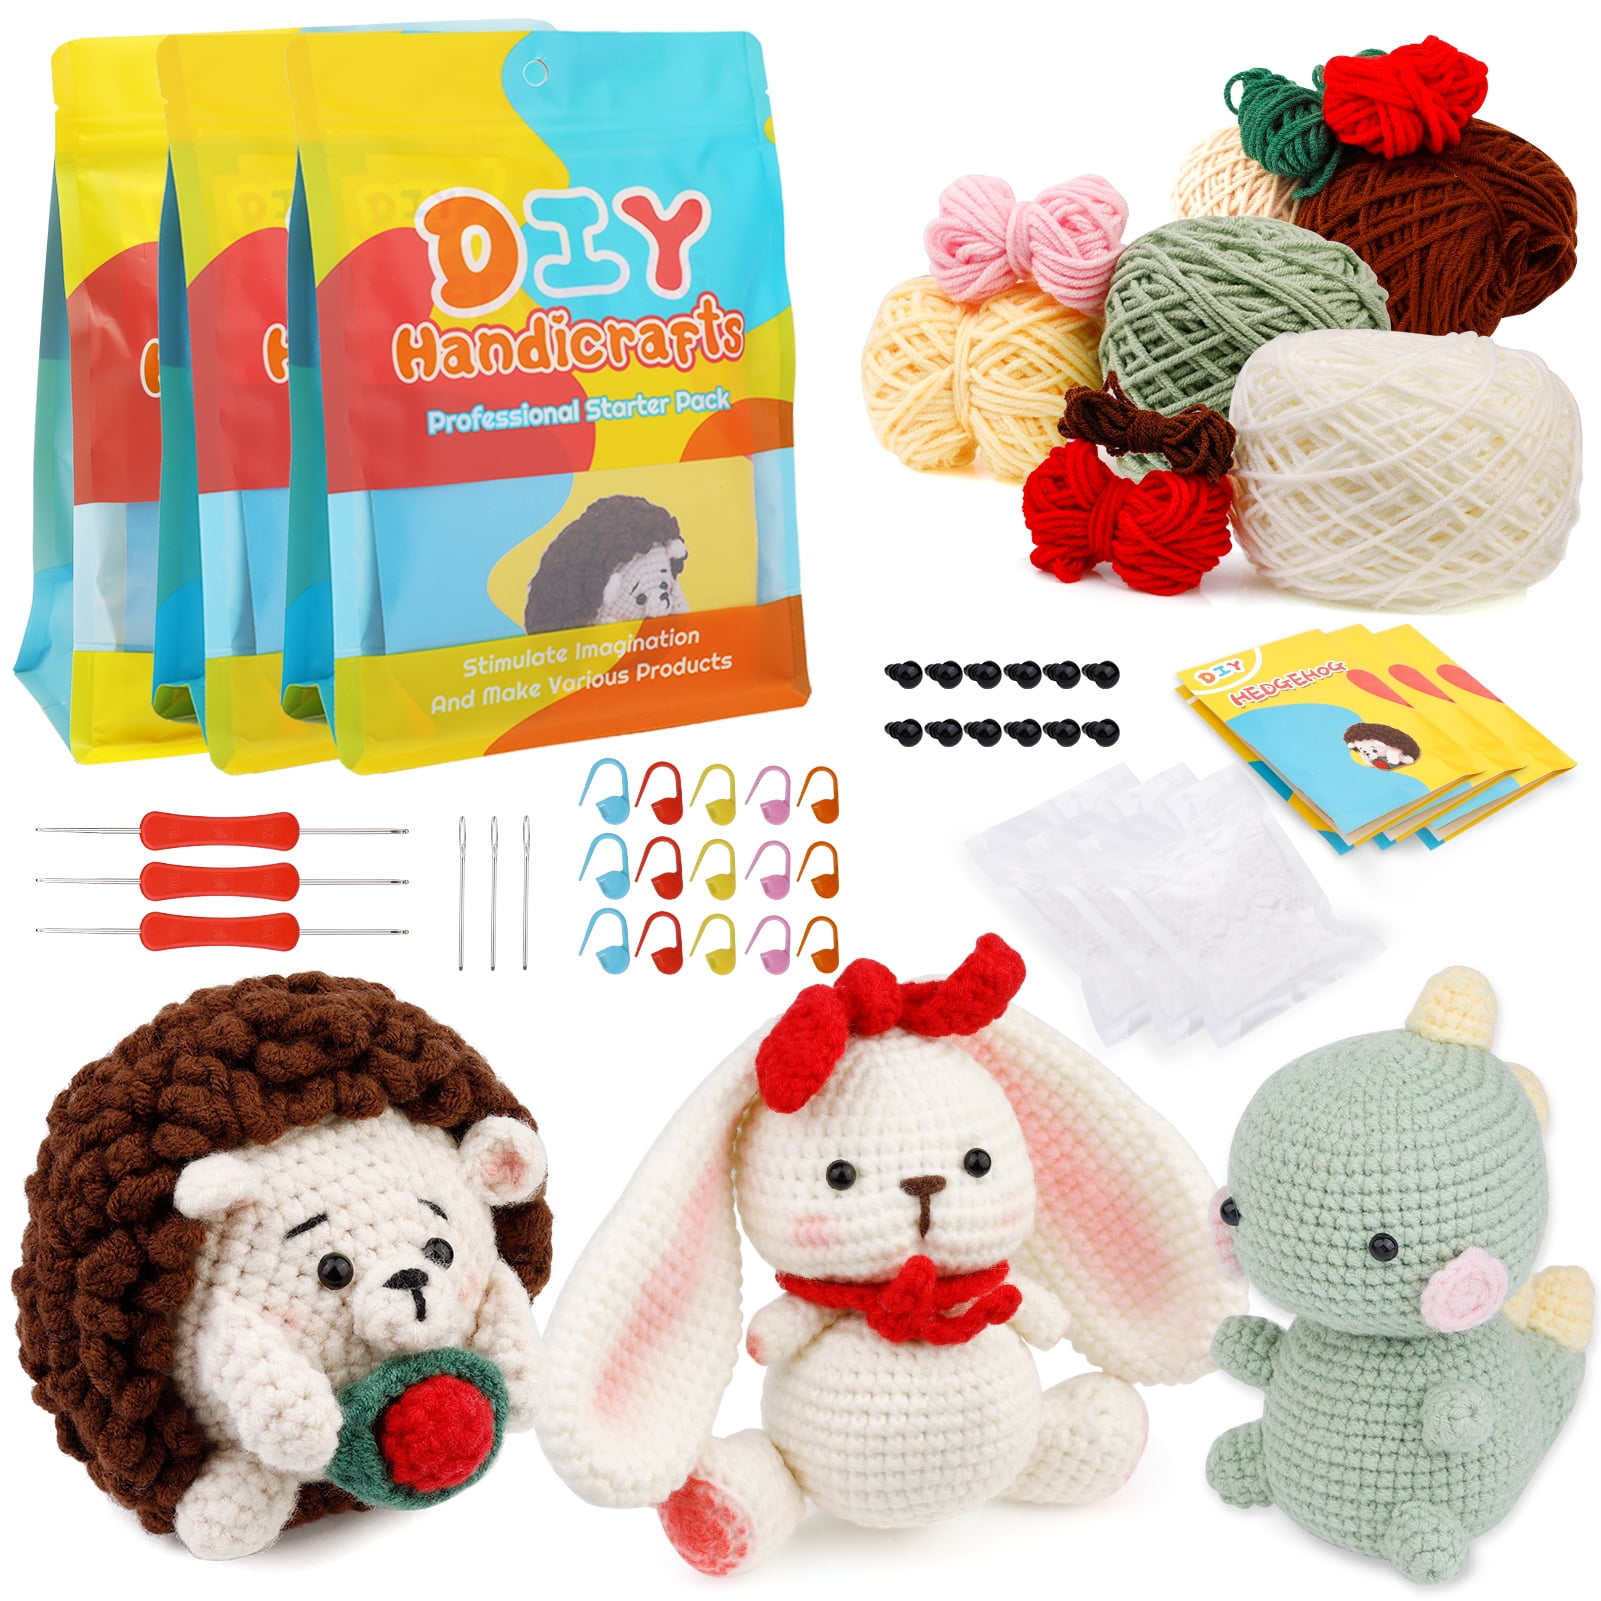 Tolatr Crochet Kit for Beginners 4 Pcs, DIY Craft for Adults and Kids, Great Gift for Crochet lovers, Crochet Animal Kit with Step by Step Video